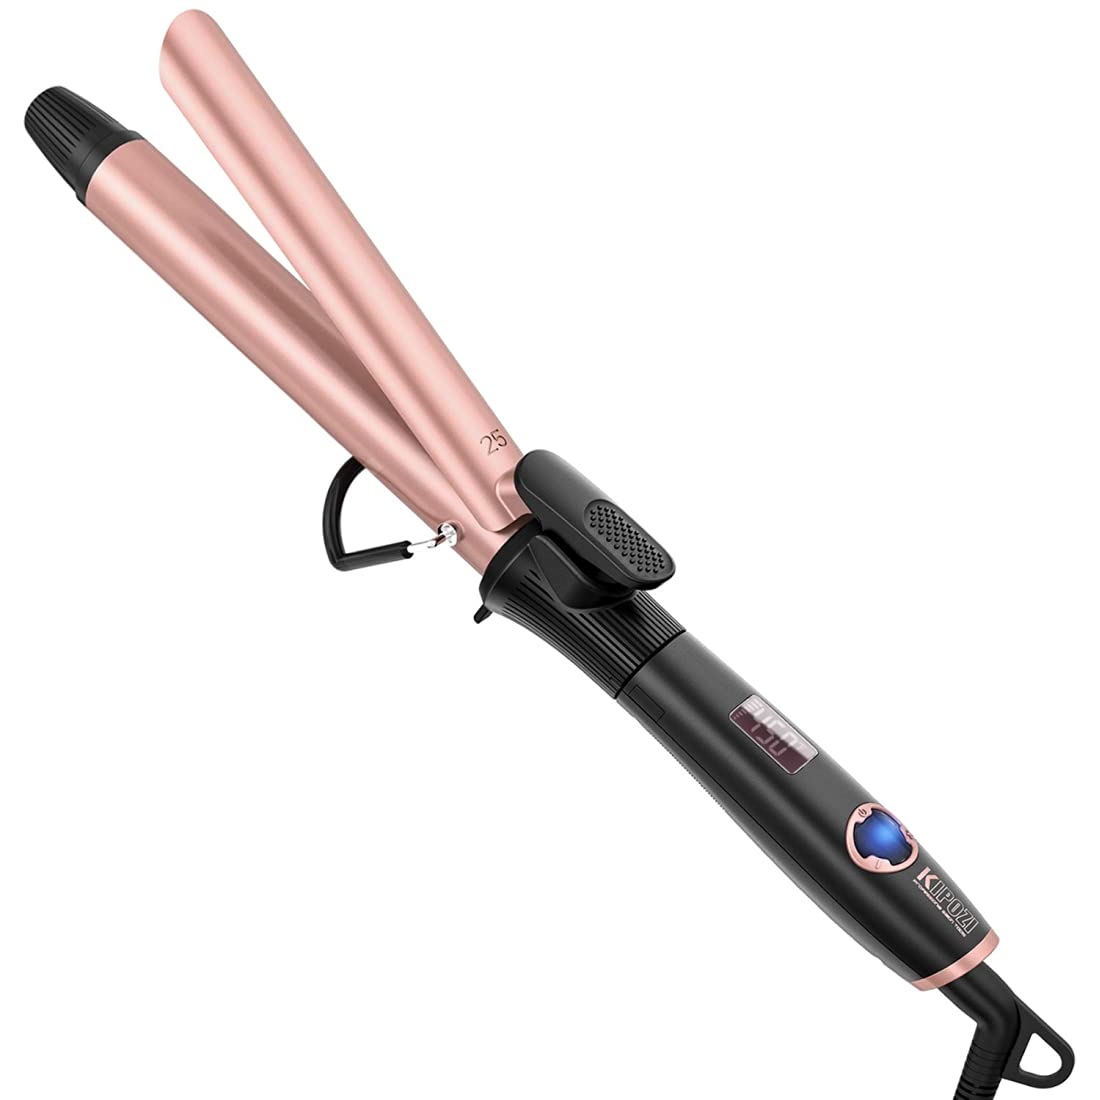 10 Best Curling Irons for Fine Hair 2020